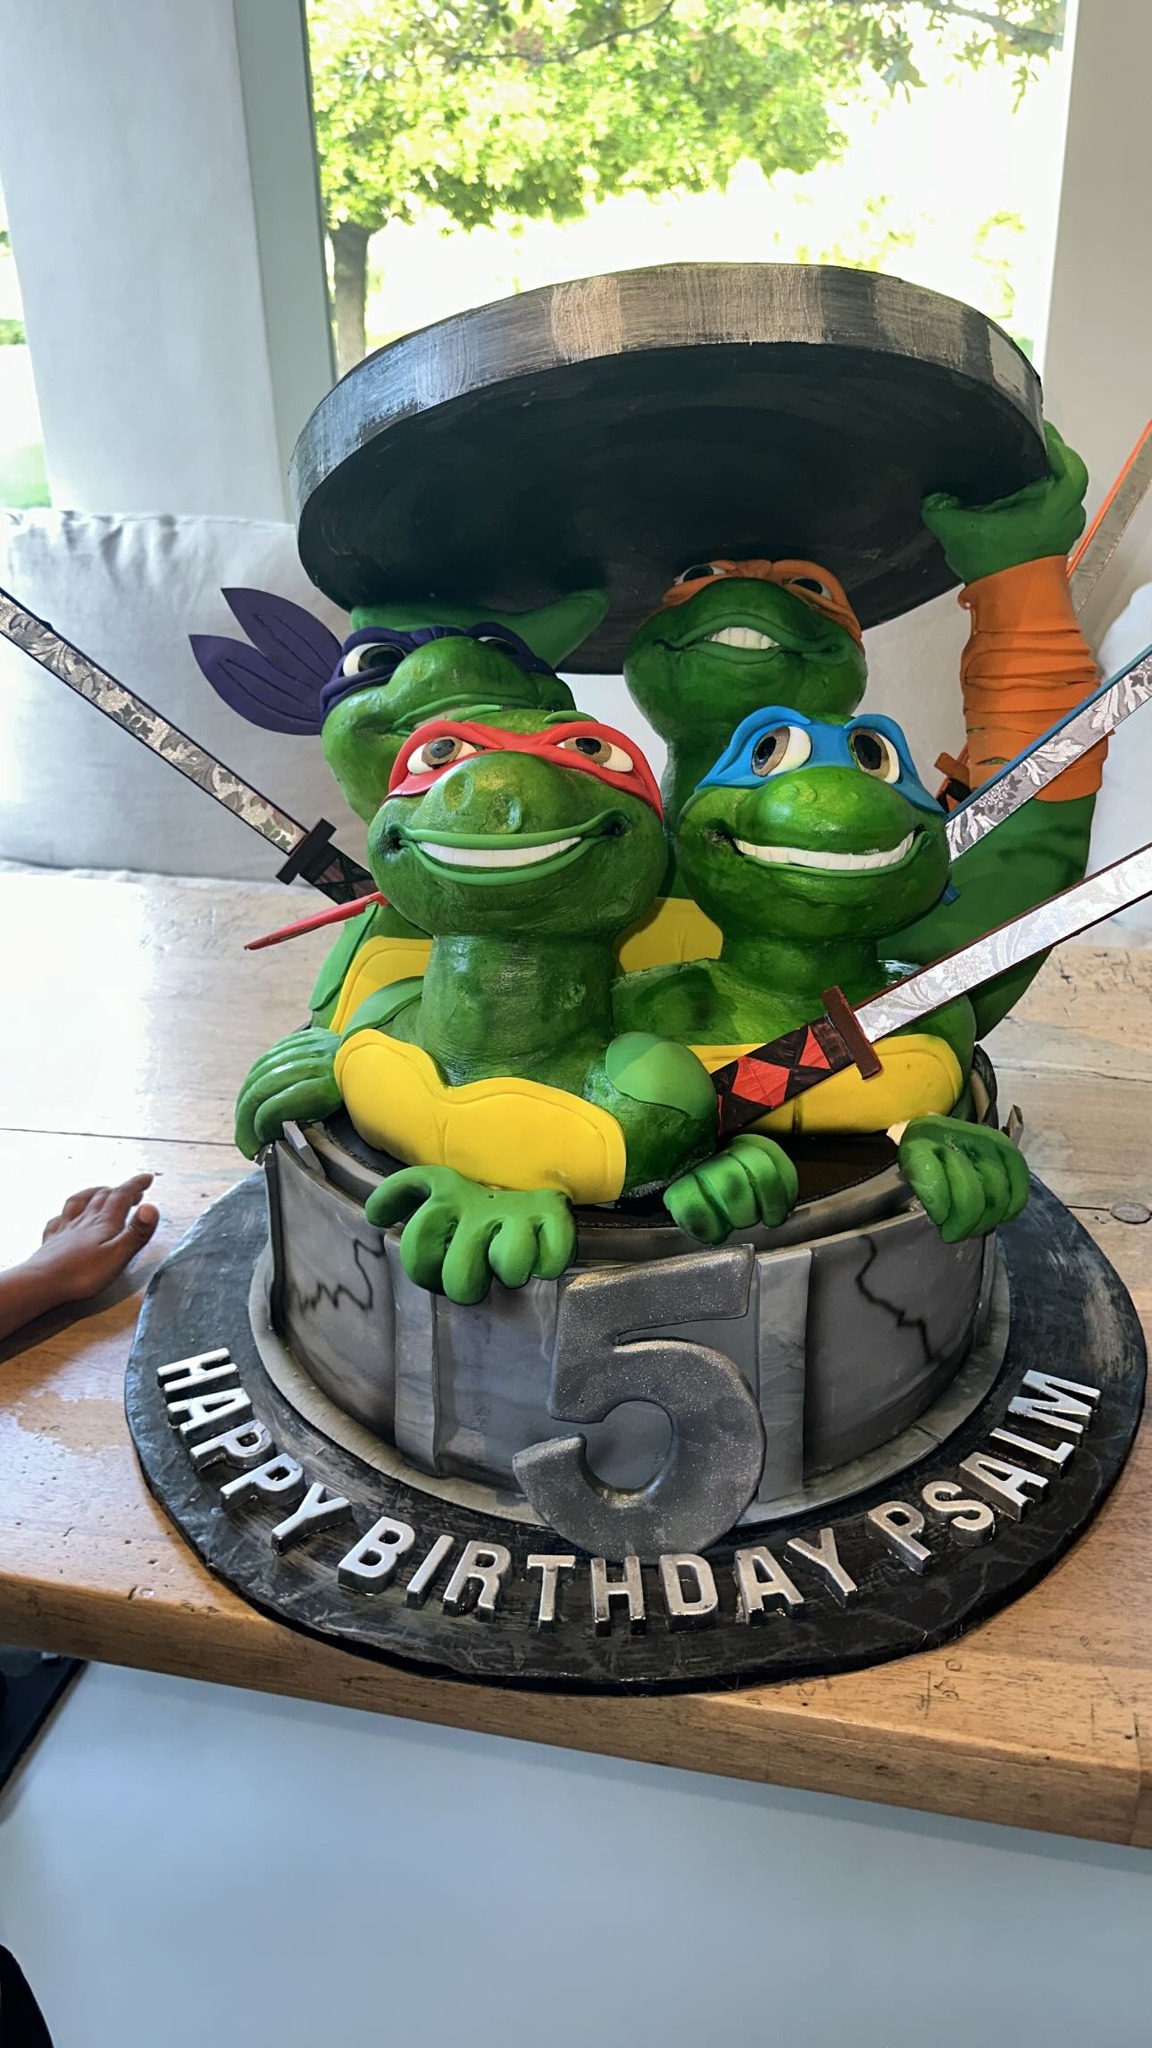 This year, it seemed as if Psalm had a Teenage Mutant Ninja Turtle-themed party as his aunt Khloe Kardashian shared a photo of his cake